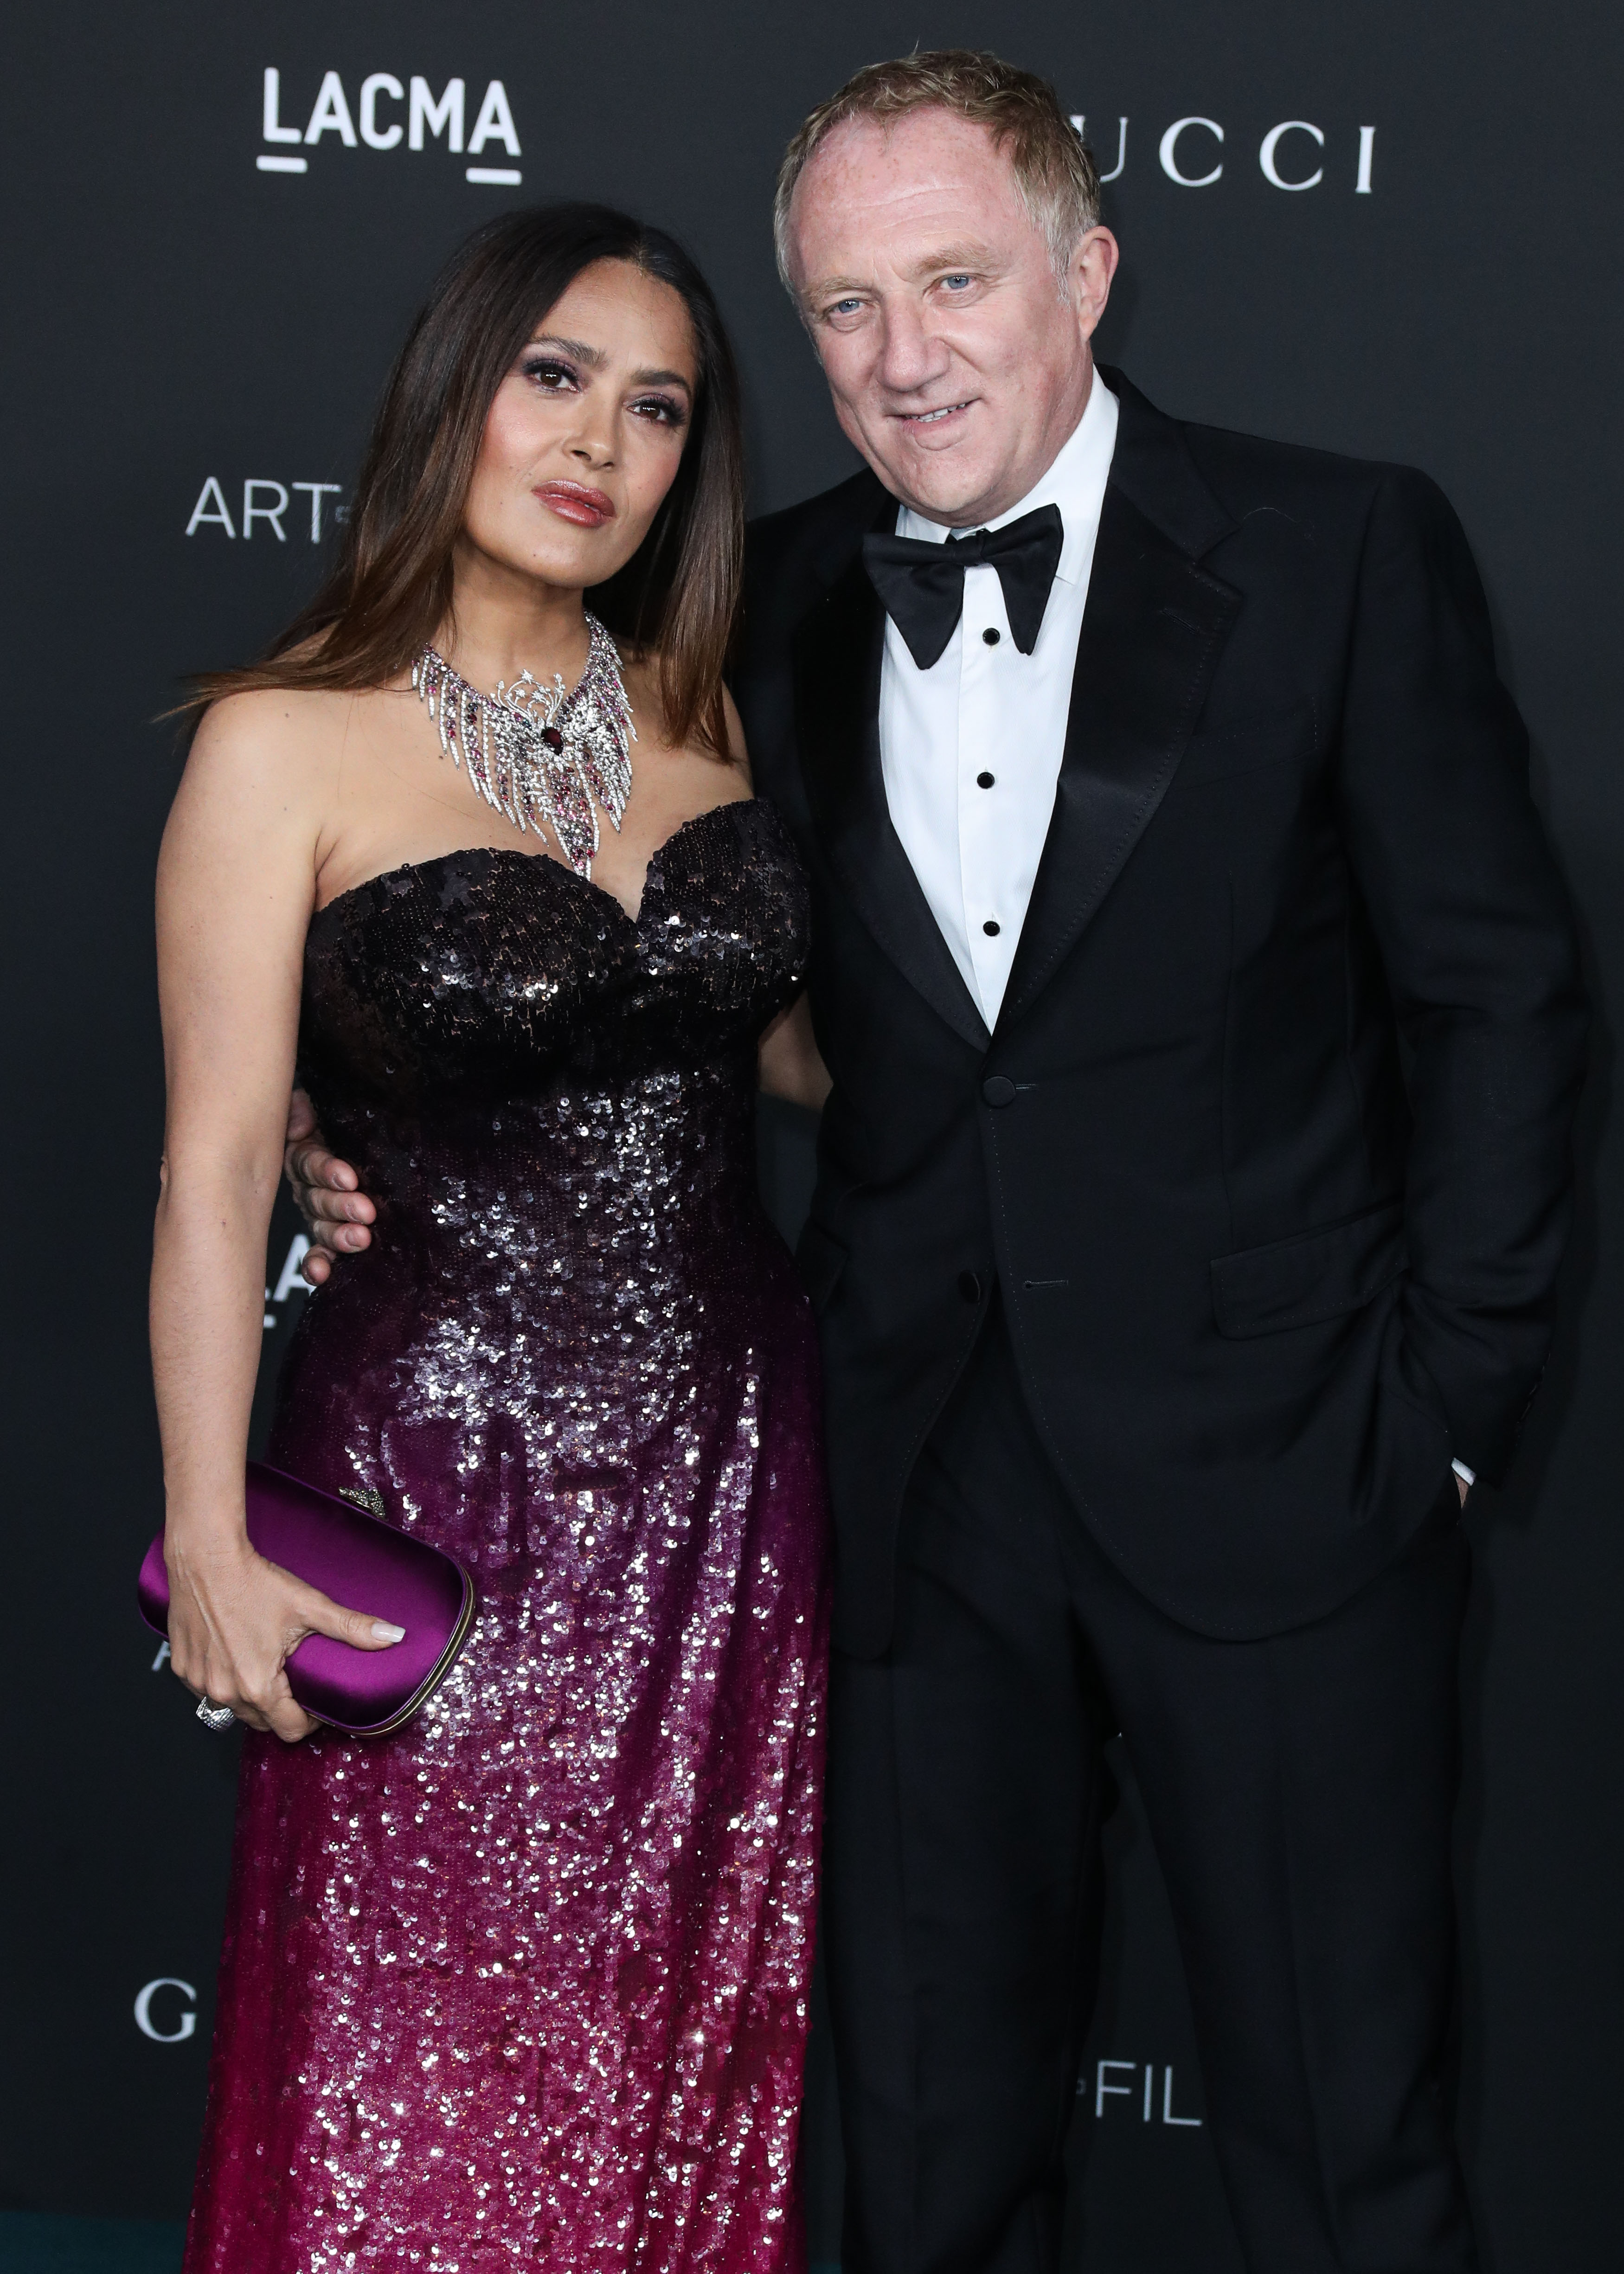 Salma Hayek and Husband's Sweetest Pictures